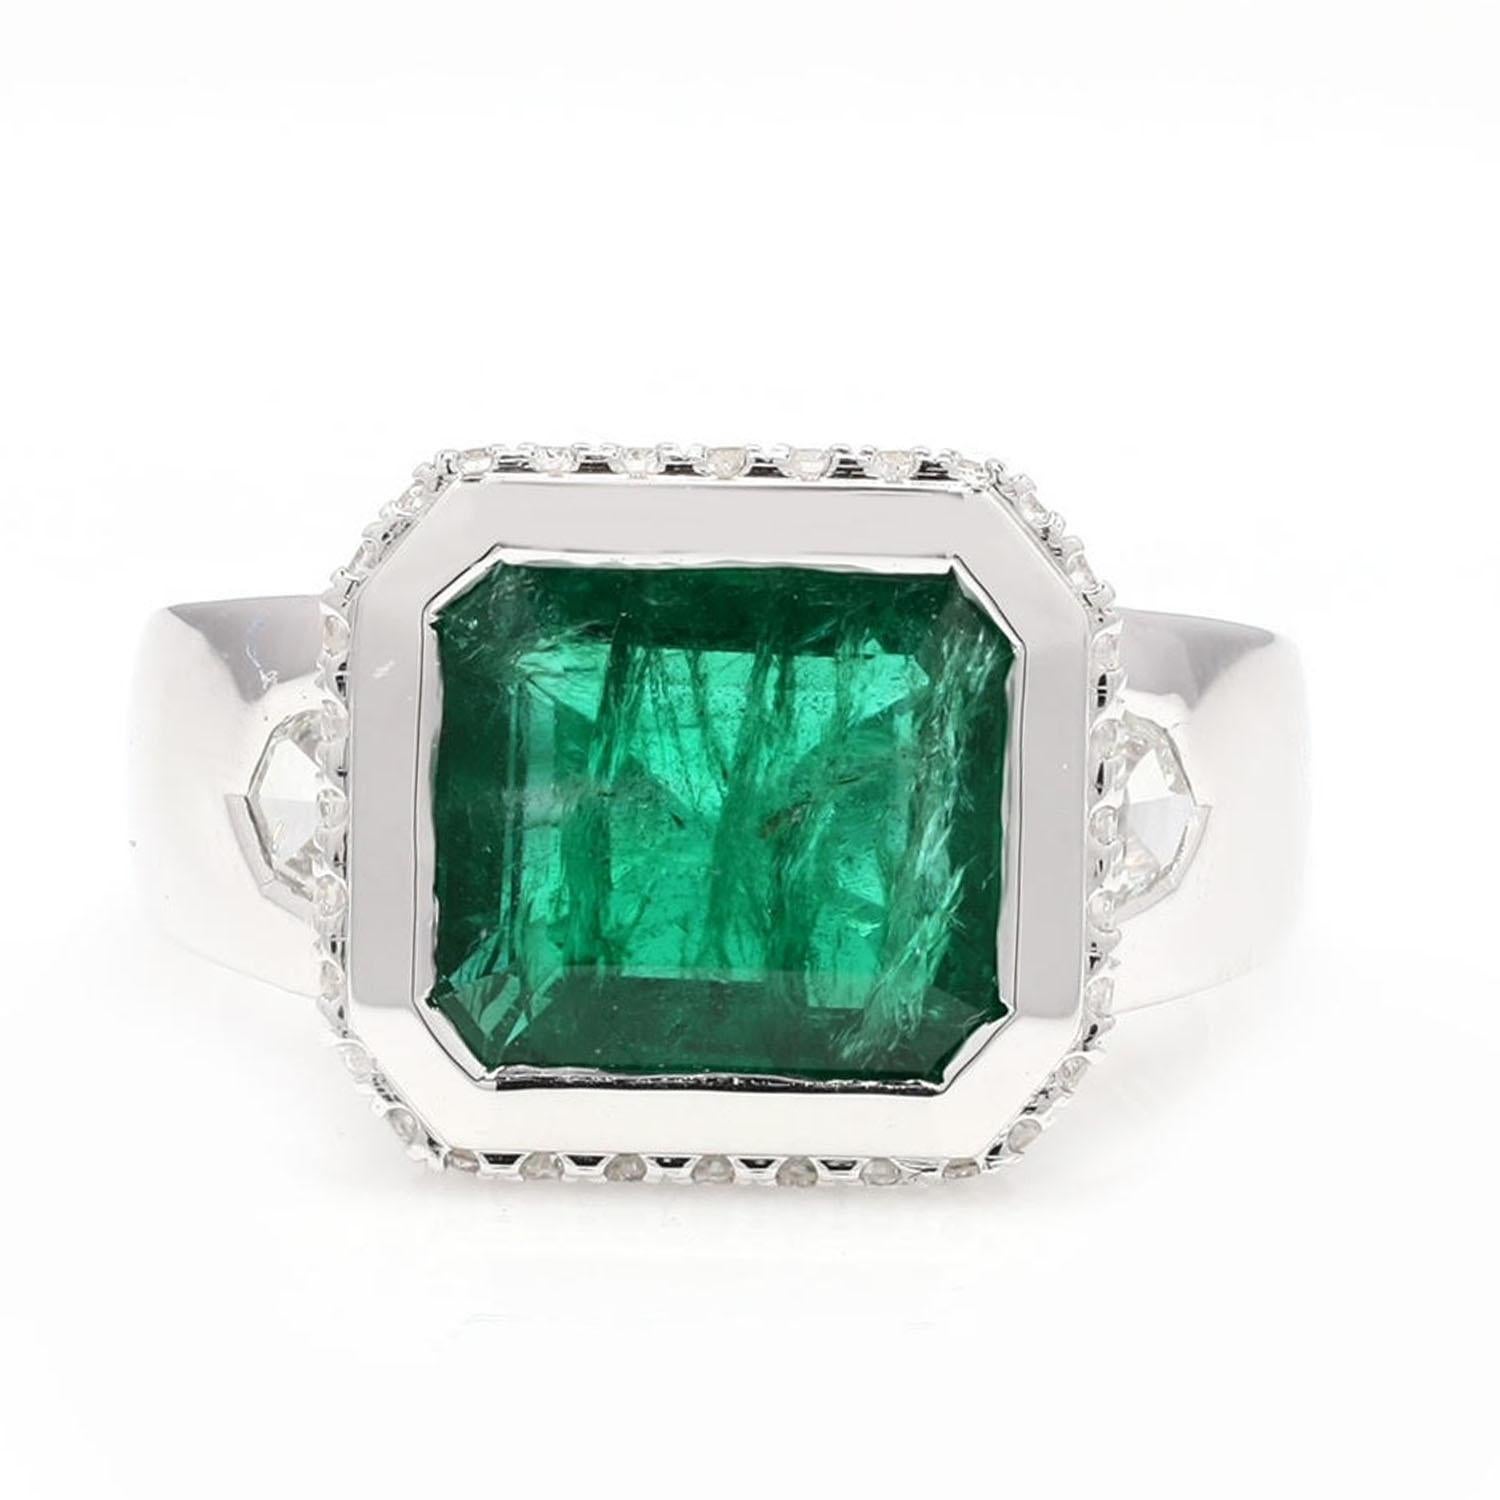 Mixed Cut Square Octogen Cut Zambian Emerald Unisex Ring with Diamonds in 18k White Gold For Sale